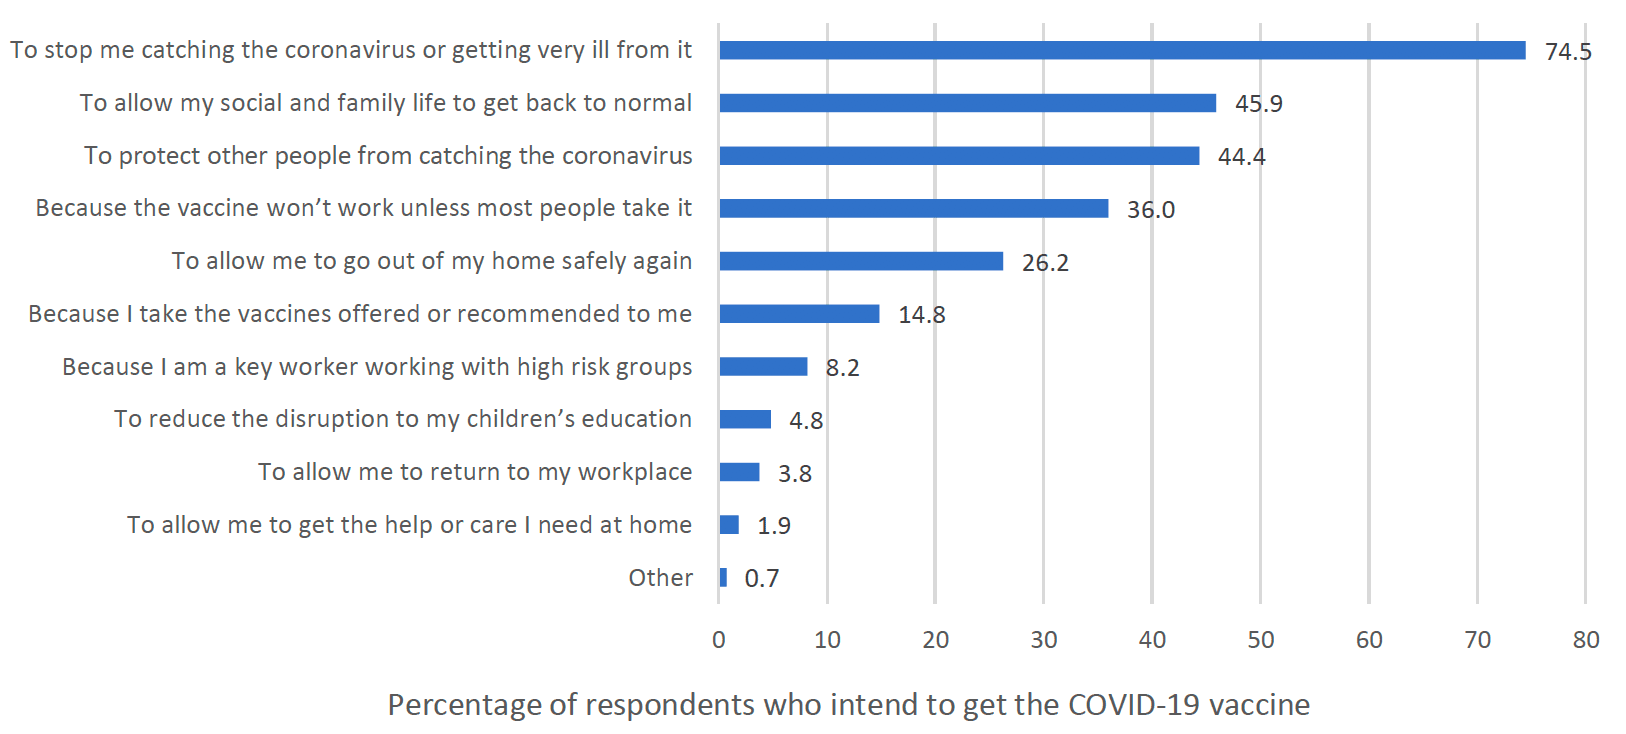 This figure illustrates the reasons for taking the COVID-19 vaccine for the percentage of respondents who intend to get the vaccine. Of these, 74.5% agreed that the vaccine will stop them from catching the coronavirus or getting very ill from it, 45.9% reported that it would allow their social and family life to get back to normal and 44.4% reported taking it to protect other people from catching the coronavirus. A further 36% agreed that the vaccine won’t work unless most people take it and 26.2% reported that it would allow them to go out of their home safely again. Fourteen-point-eight-percent reported as a reason generally taking the vaccines offered or recommended to them and 8.2% of participants reported being a key worker with high risk groups. Finally, 3.8% said it would allow them to return to their workplace, 1.9% said it will allow them to get the help and care they need at home and only 0.7% indicated ‘other’ reasons. 